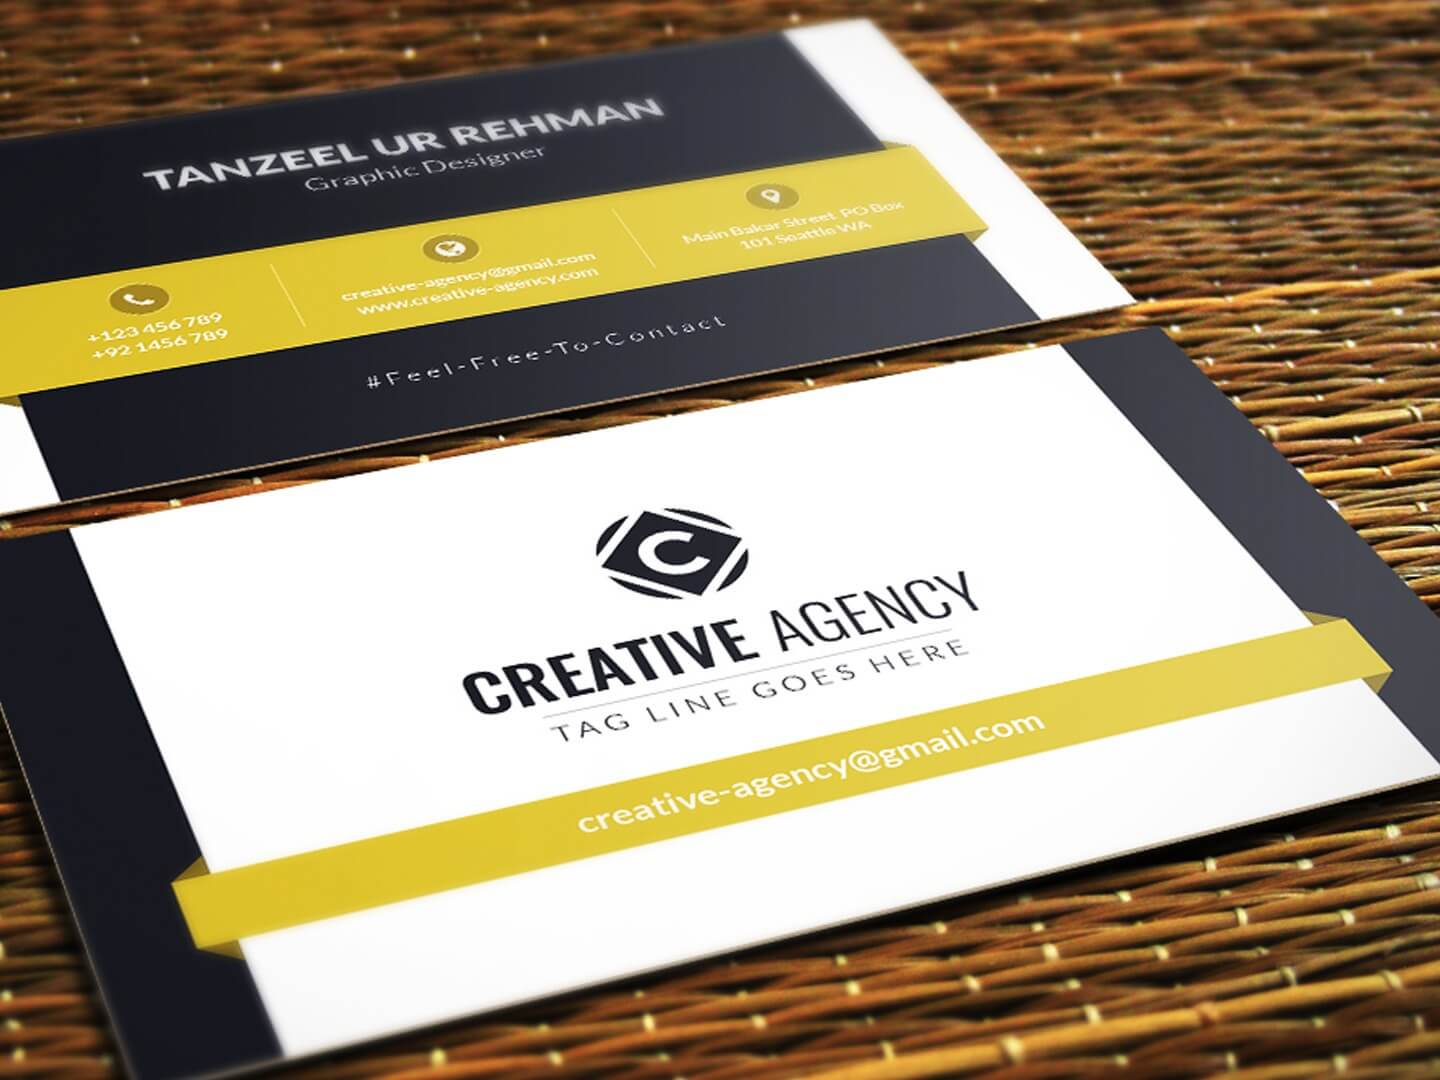 Business Cards Template – Free Downloadtanzeel Ur Rehman Throughout Download Visiting Card Templates